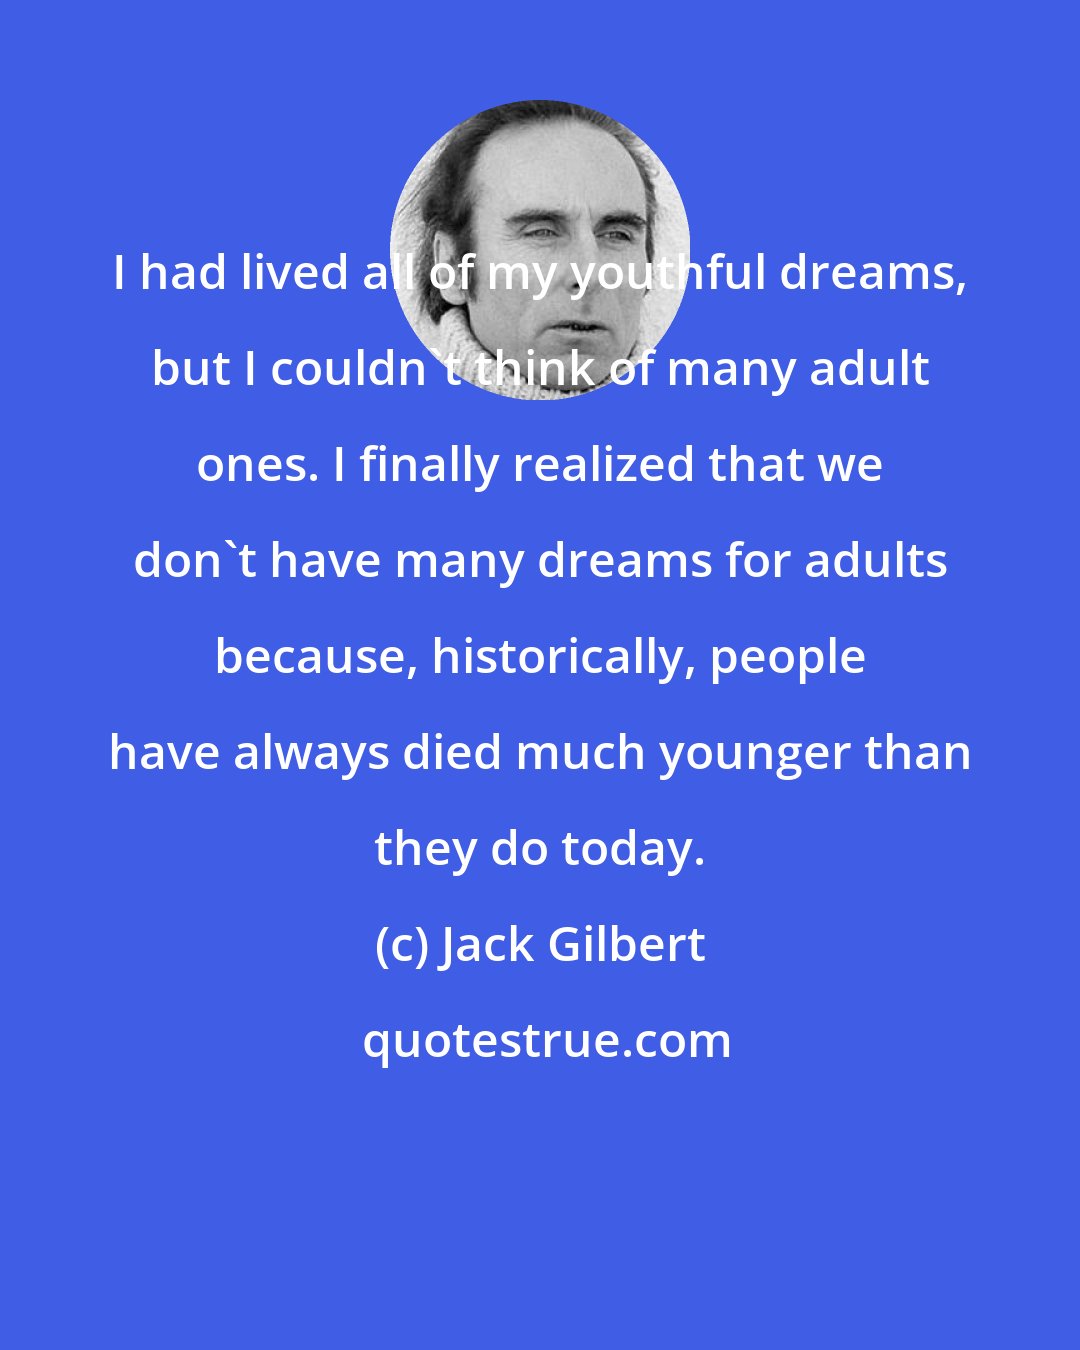 Jack Gilbert: I had lived all of my youthful dreams, but I couldn't think of many adult ones. I finally realized that we don't have many dreams for adults because, historically, people have always died much younger than they do today.